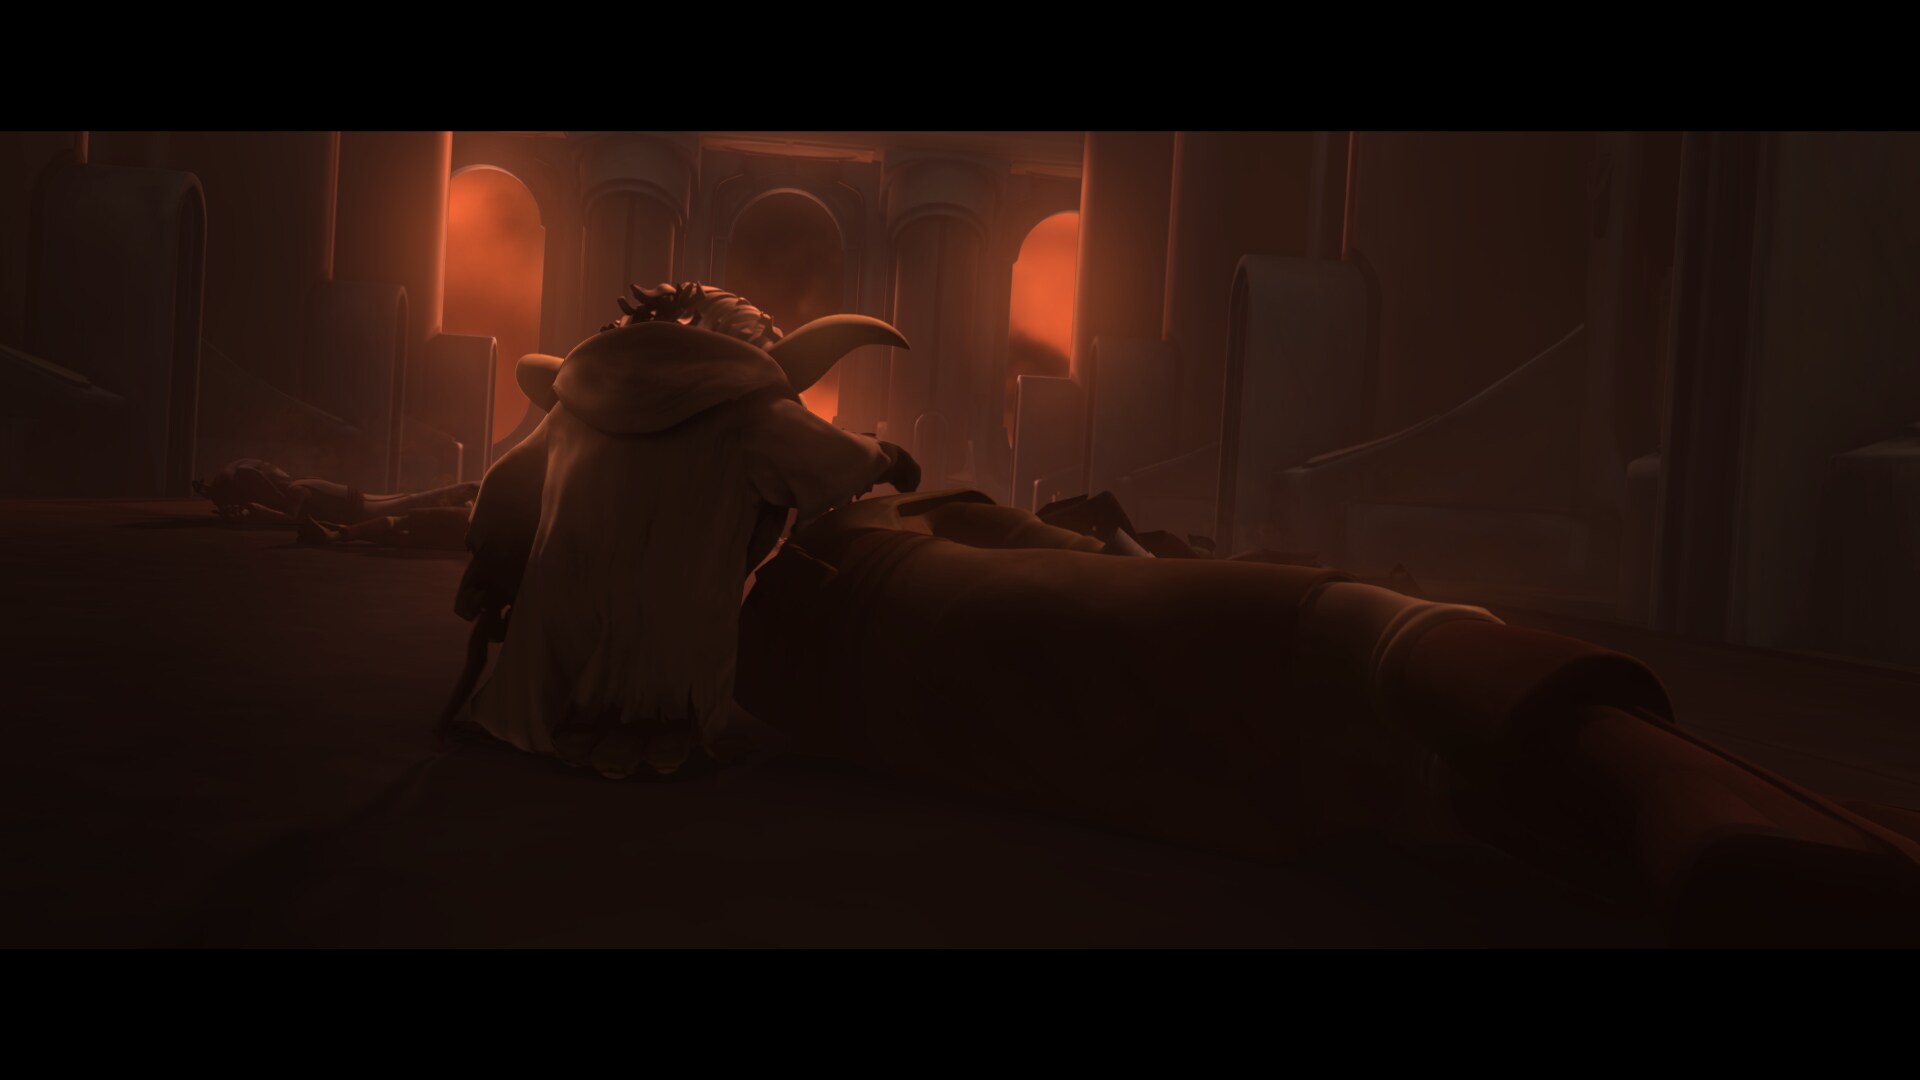 As Yoda walks through the ruined Jedi Temple hallway, an echo of the "Battle of the Heroes" theme...